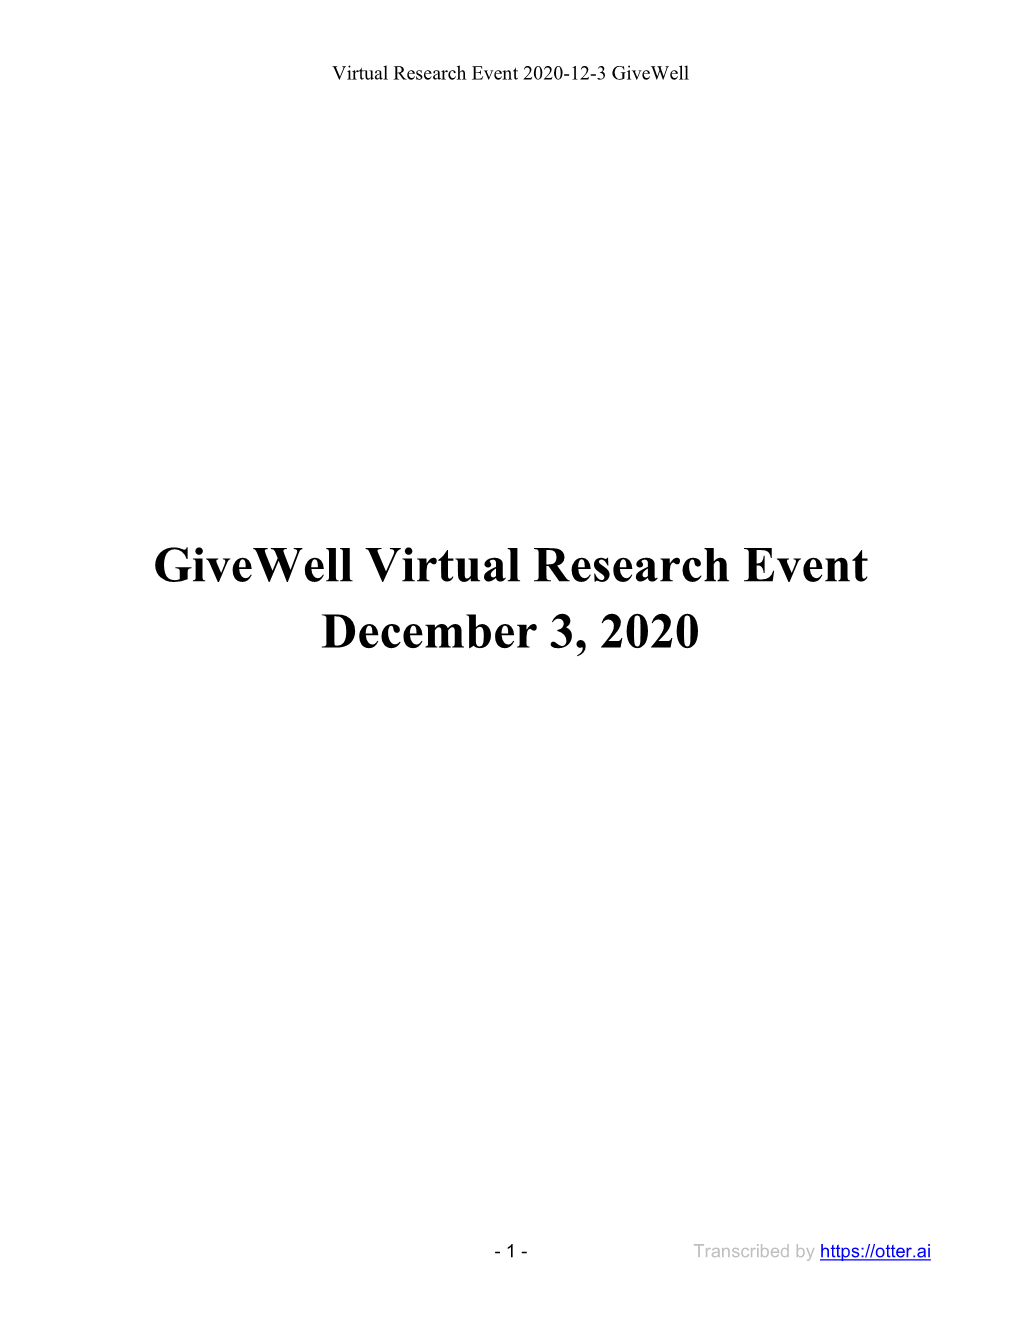 Givewell Virtual Research Event December 3, 2020